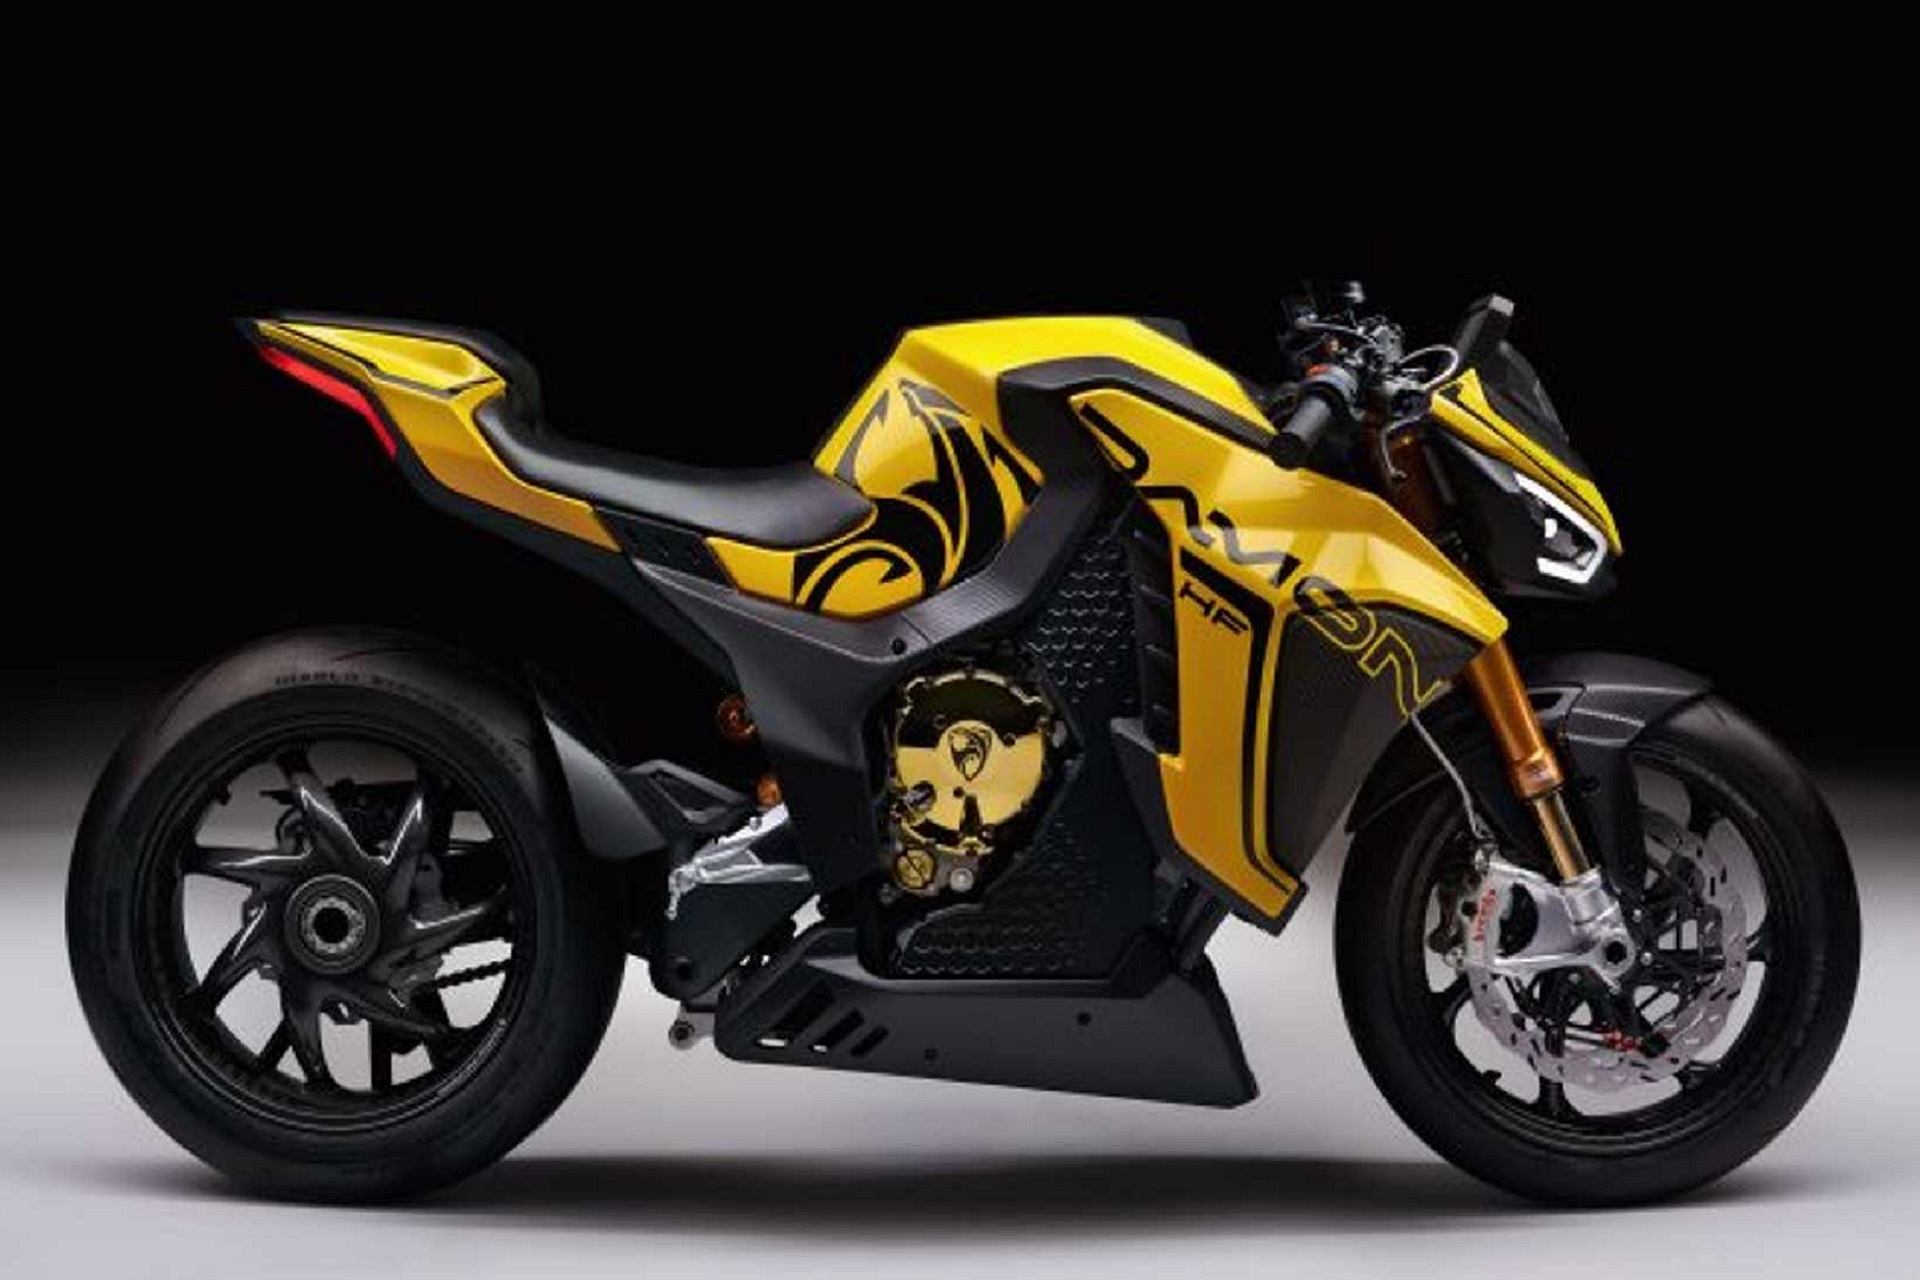 First Look Of Damon HyperFighter Is Revealed & We Wish It Arrives In India